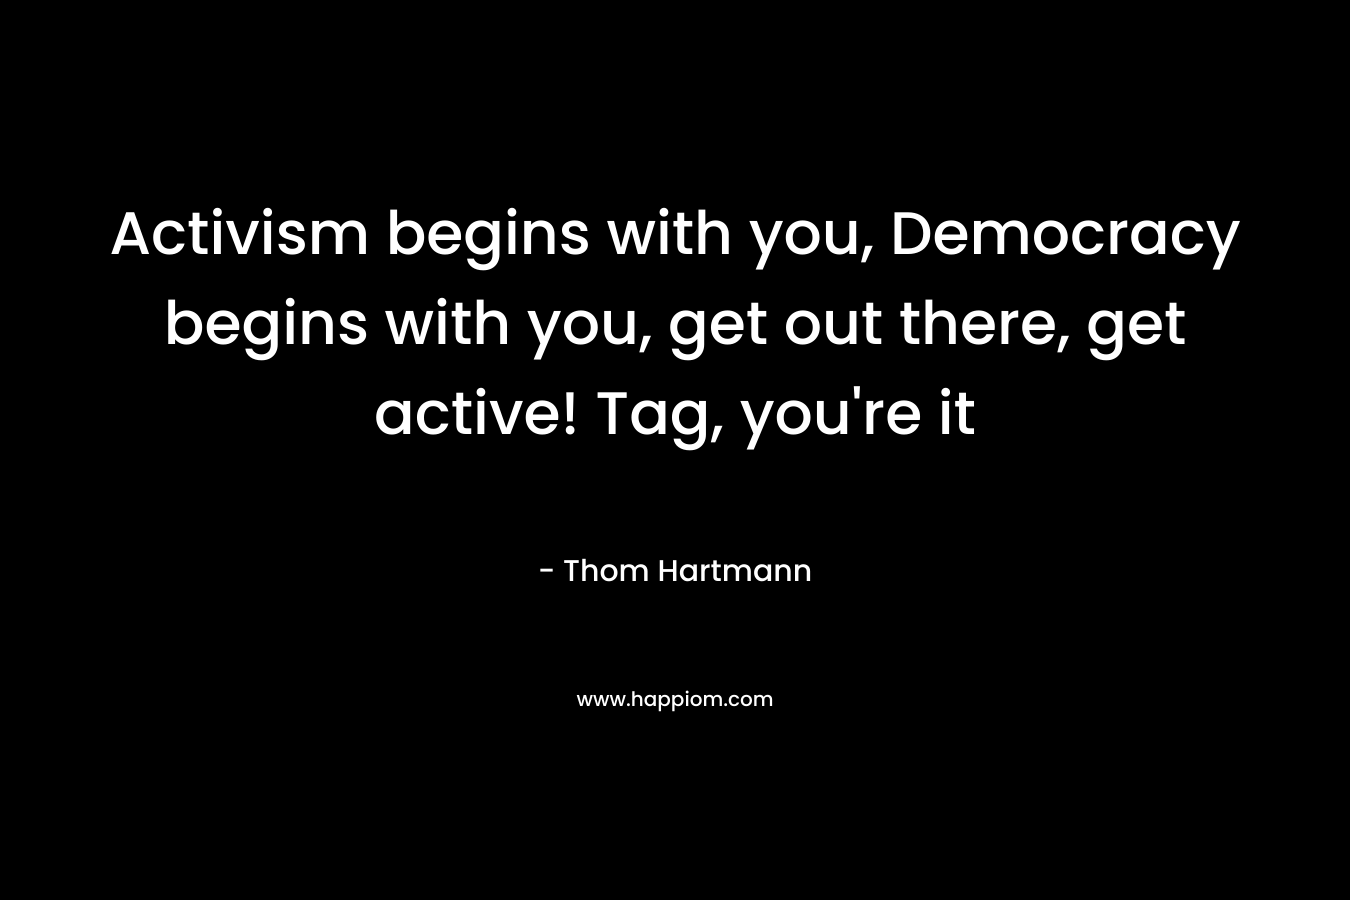 Activism begins with you, Democracy begins with you, get out there, get active! Tag, you’re it – Thom Hartmann